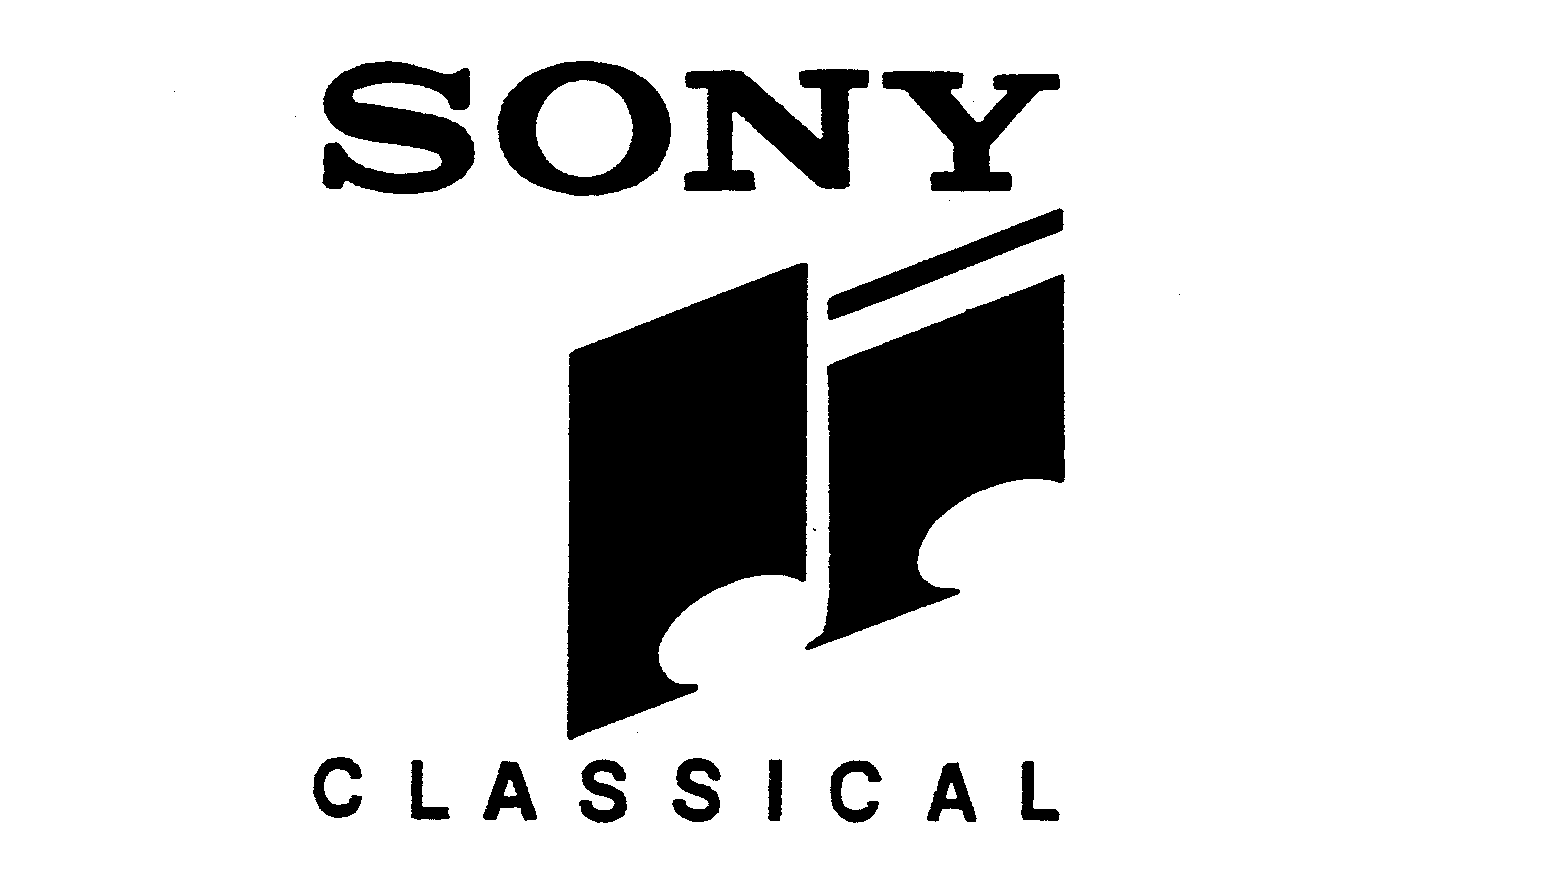  SONY CLASSICAL